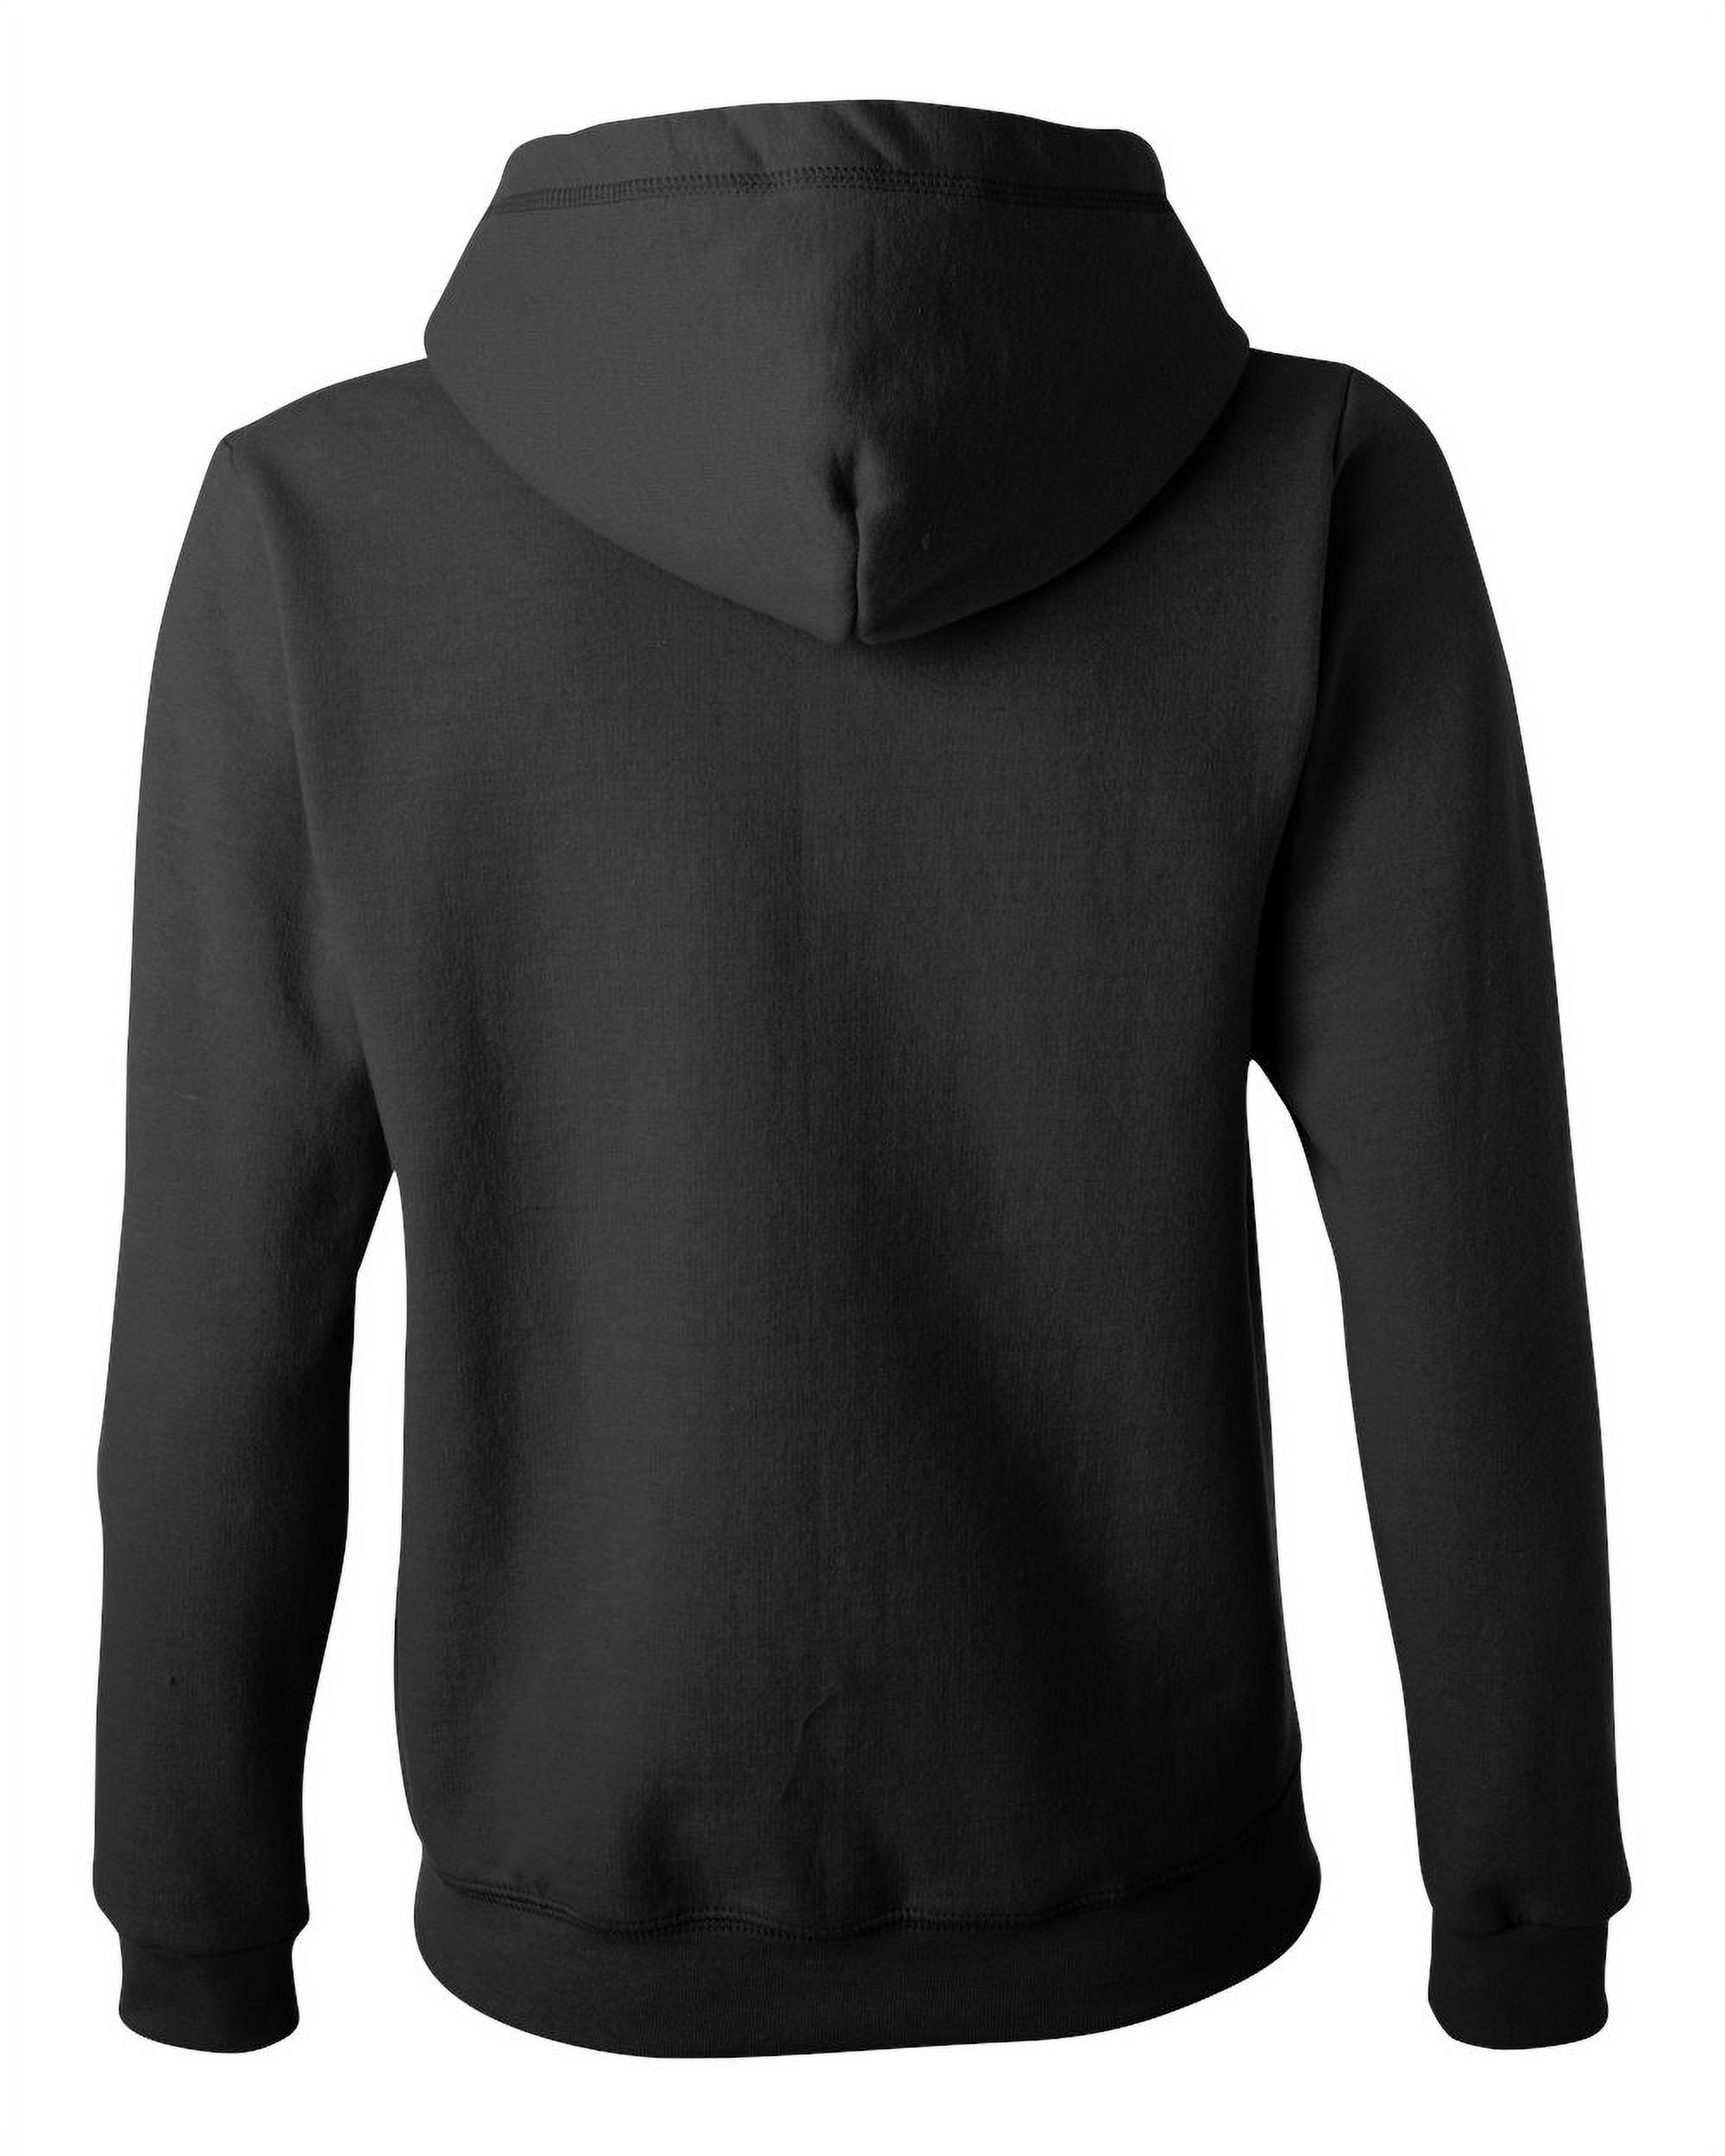 MmF - Women's Sweatshirt Full-Zip Pullover, up to Women Size 3XL - I am From Texas TX Texas - image 4 of 5